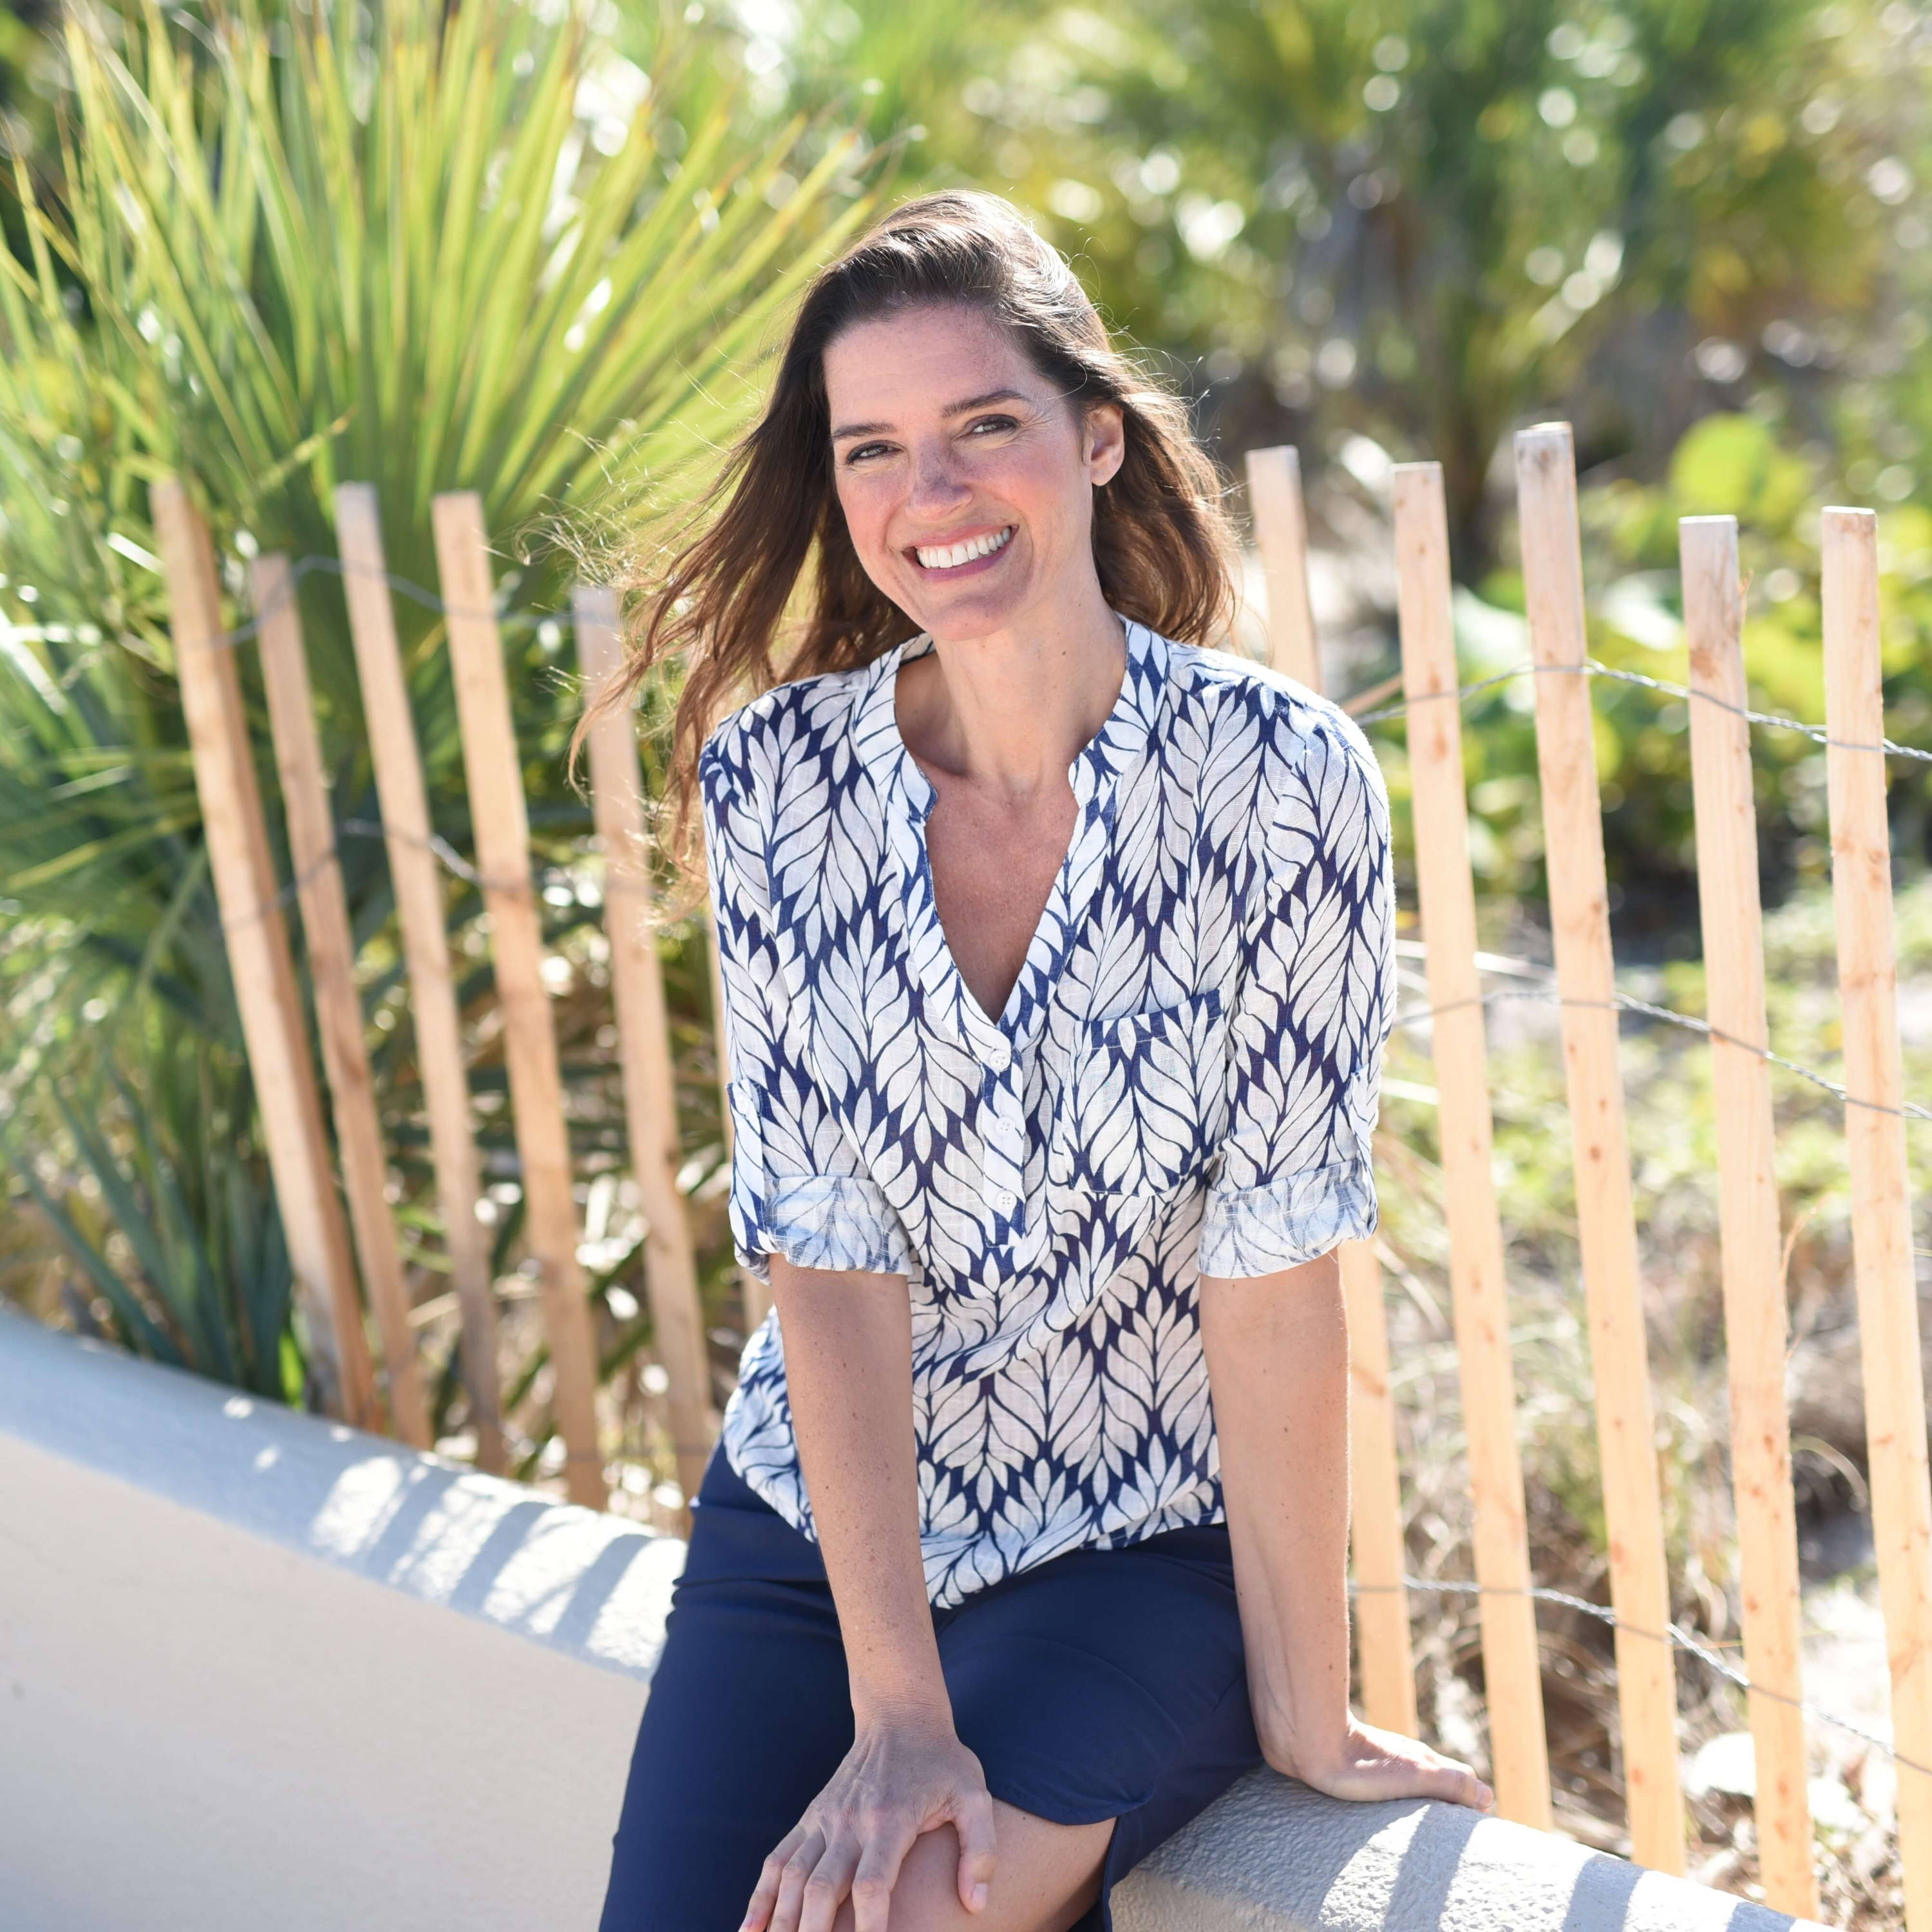 A brunette woman in a printed blouse and shorts smiles as she sits against a fence at the beach